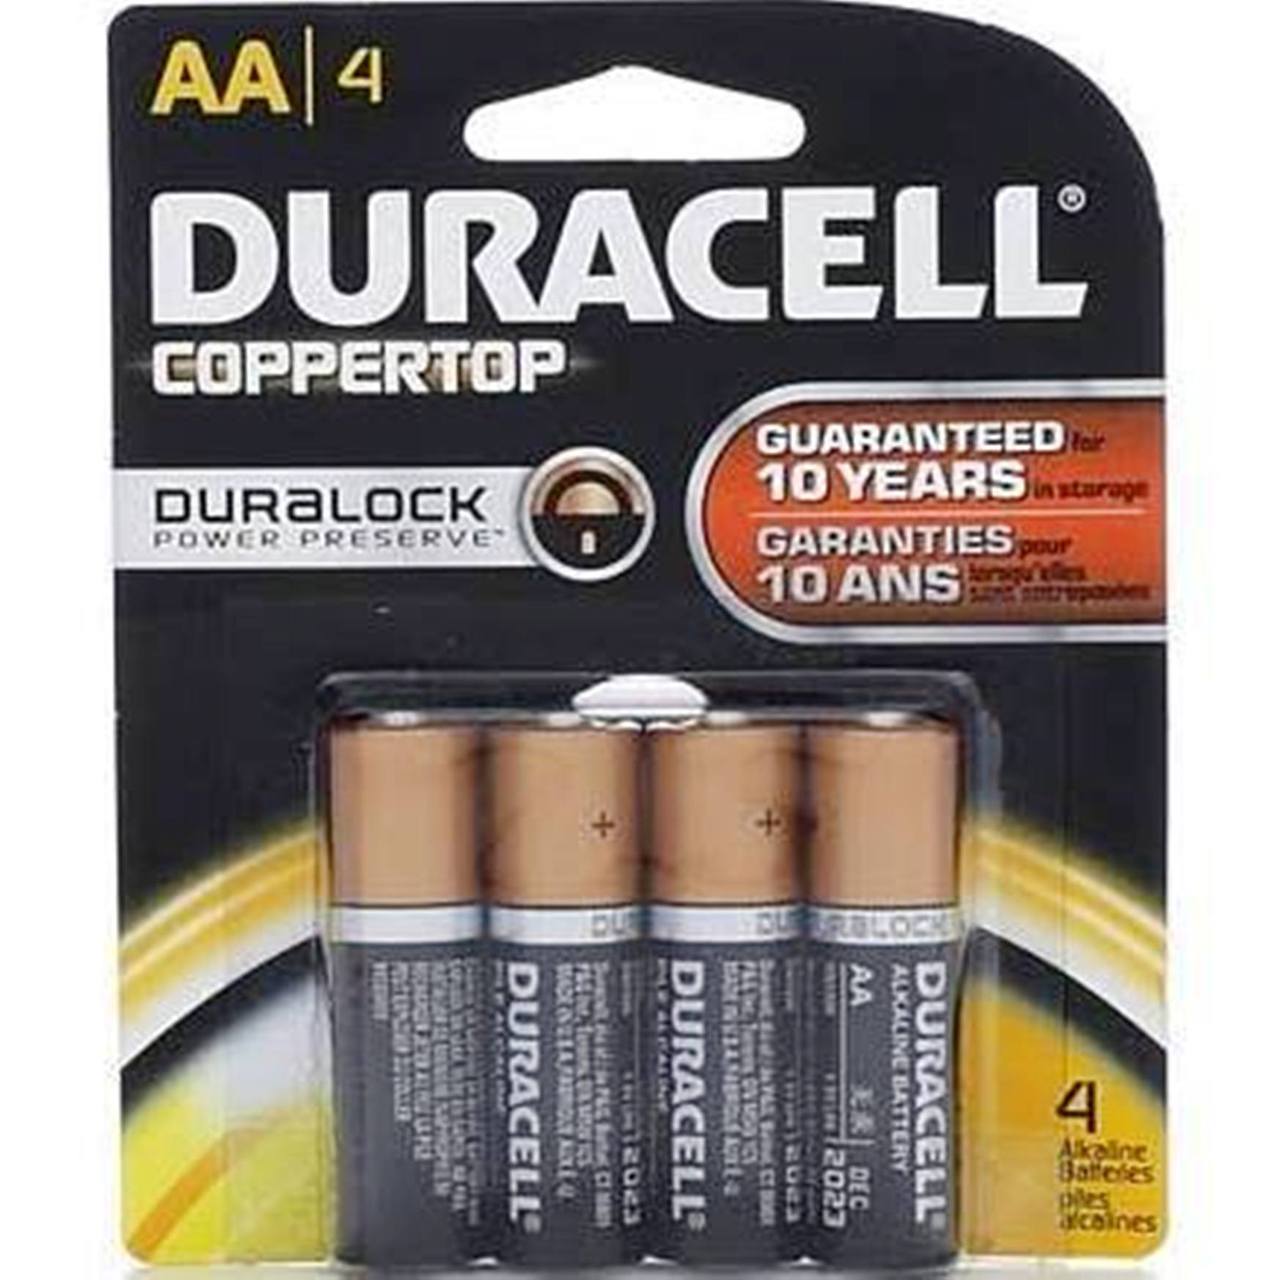 Duracell Coppertop Duralock AA - Original Retail 4 Pack Carded + FREE SHIPPING!